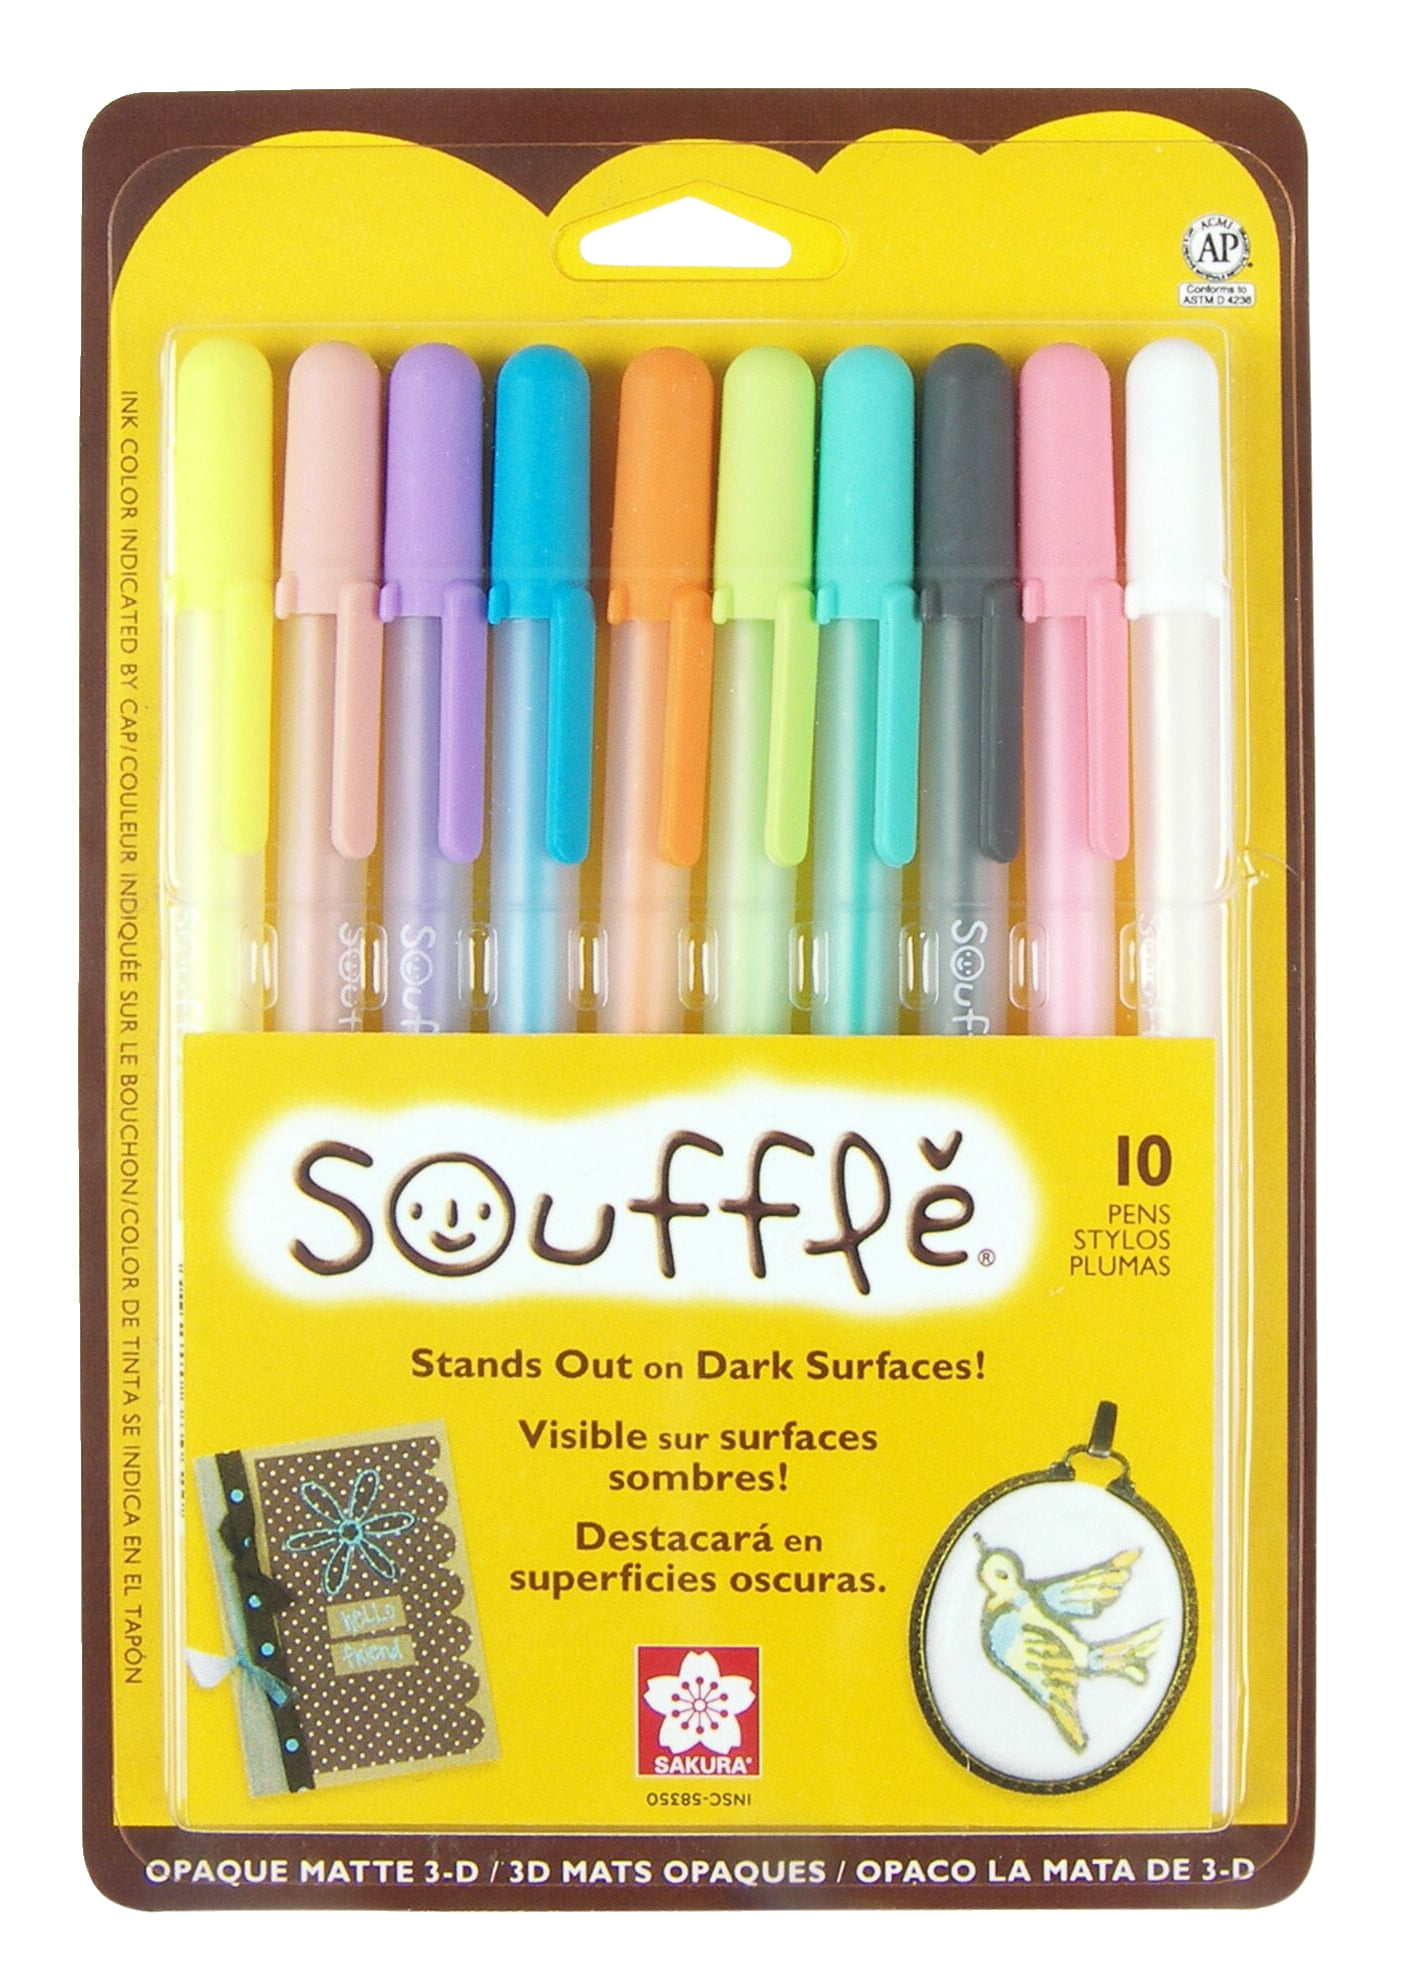 Sakura Gelly Roll Moonlight Bold Point Pens - Assorted Colors - 10 pack